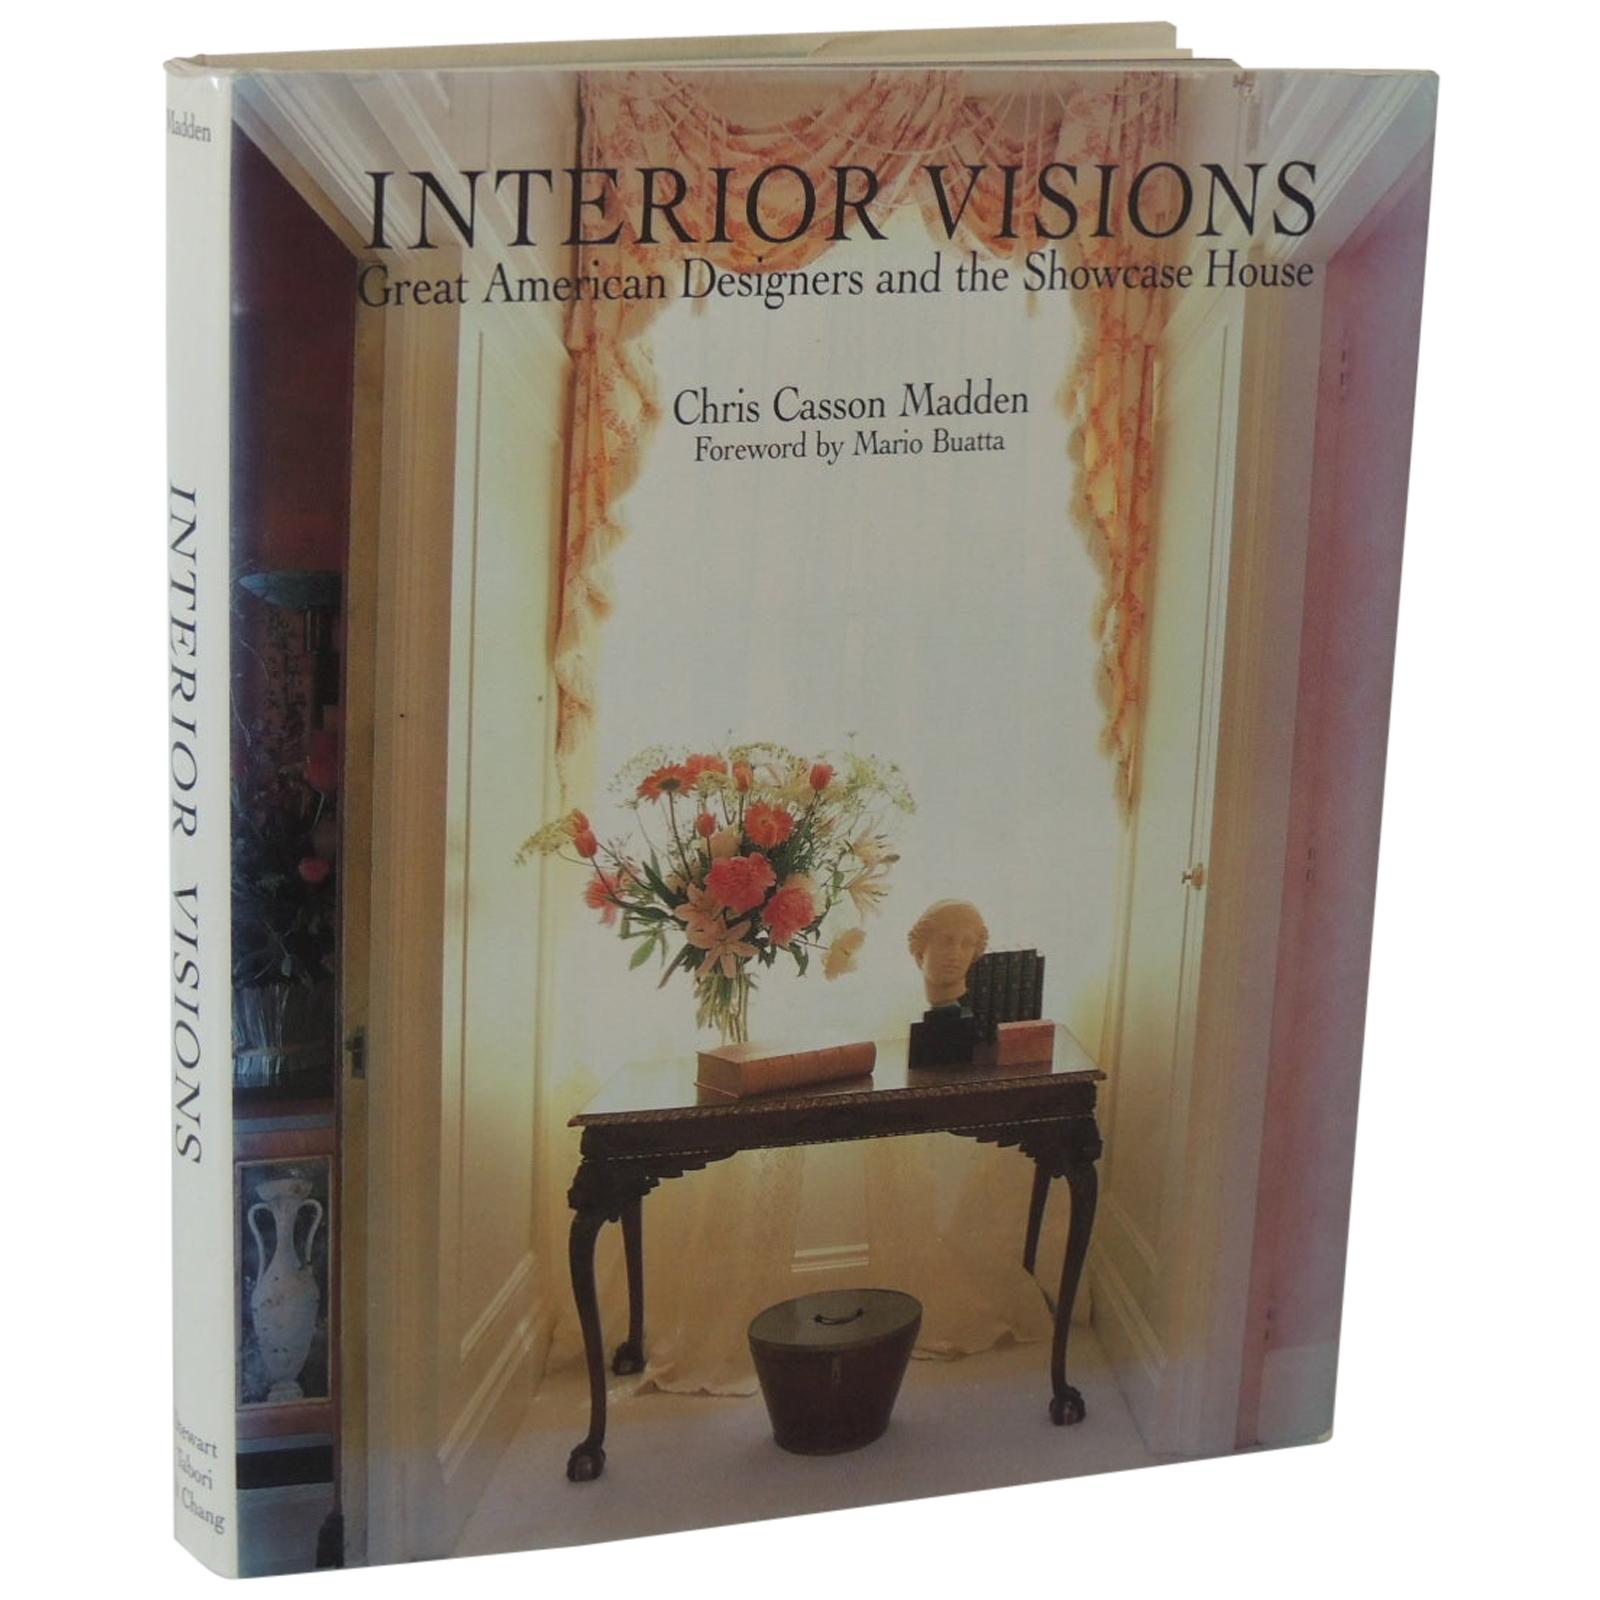 Interior Visions Vintage Decorative Hard-Cover Coffee Table Book